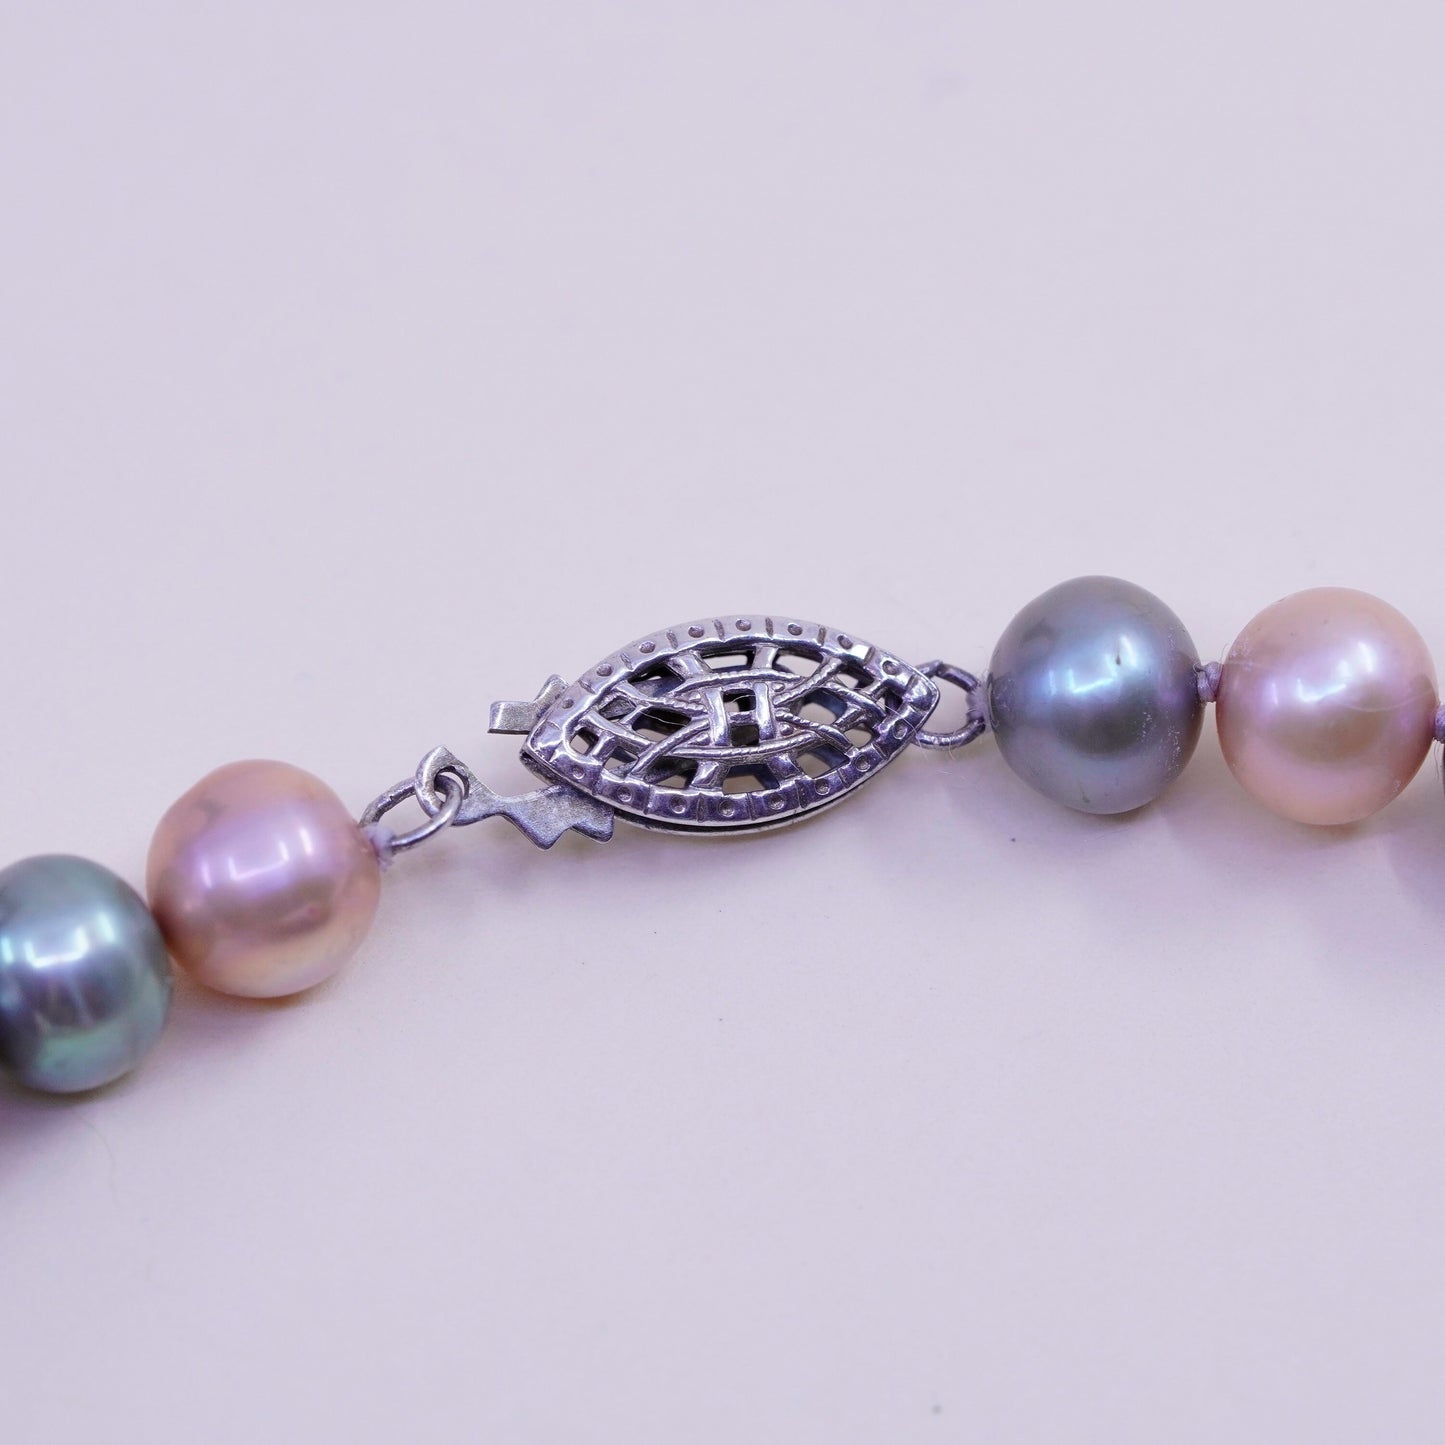 6.75, Vintage handmade bracelet, freshwater pearl with 925 silver clasp